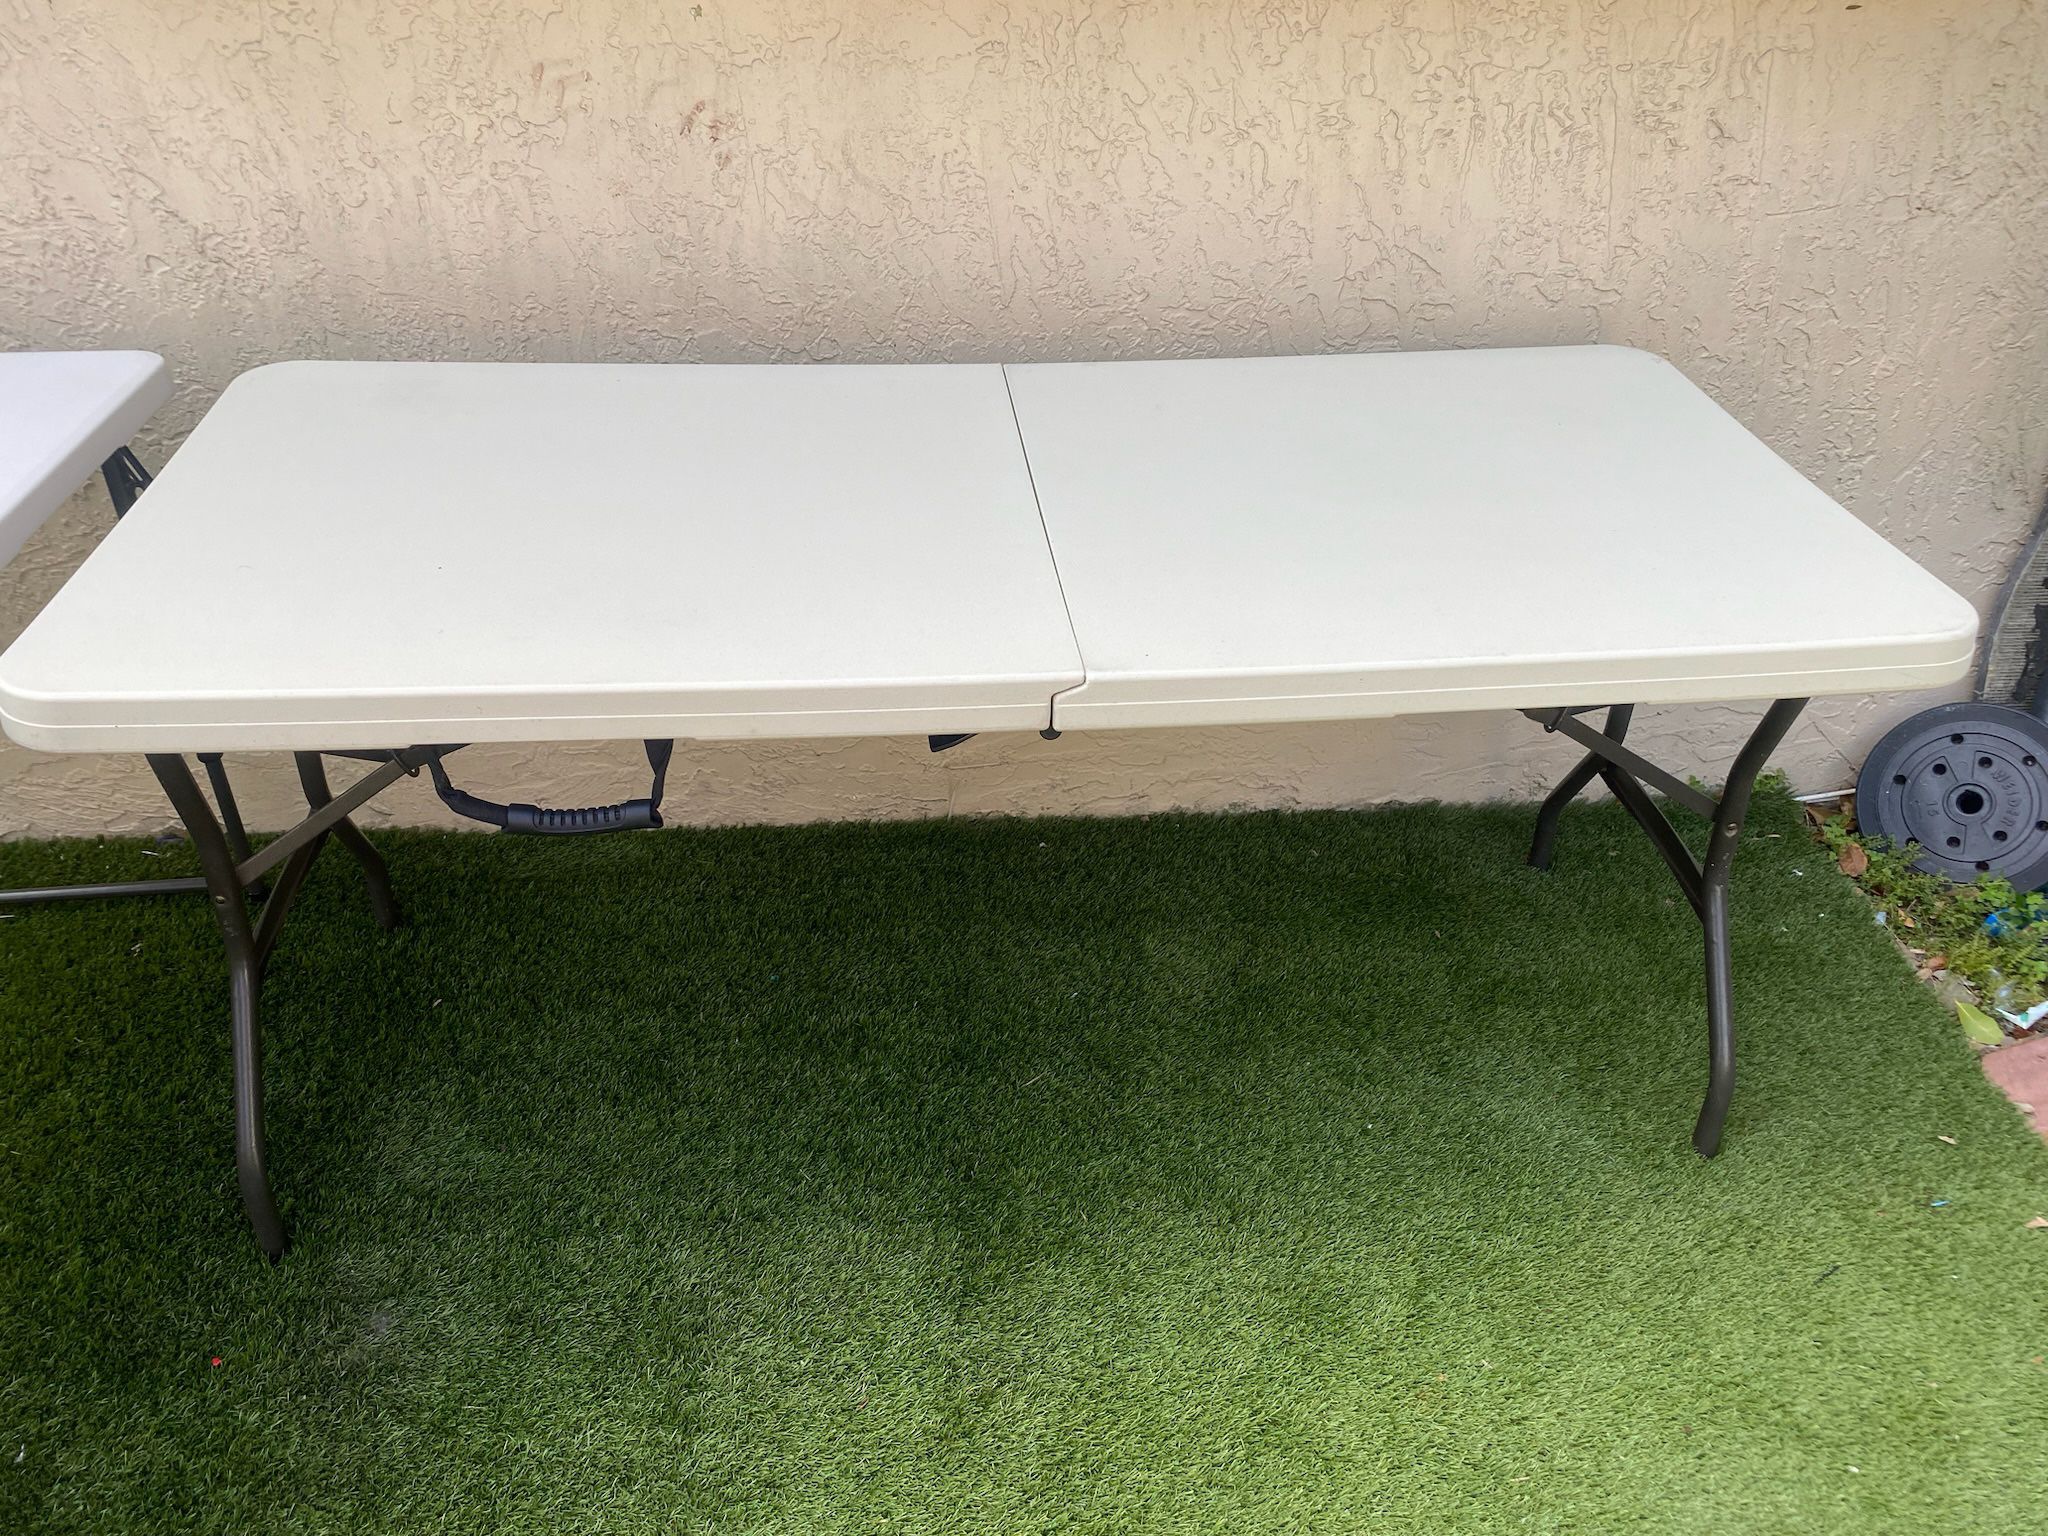 Five Foot Folding Table - See My Items